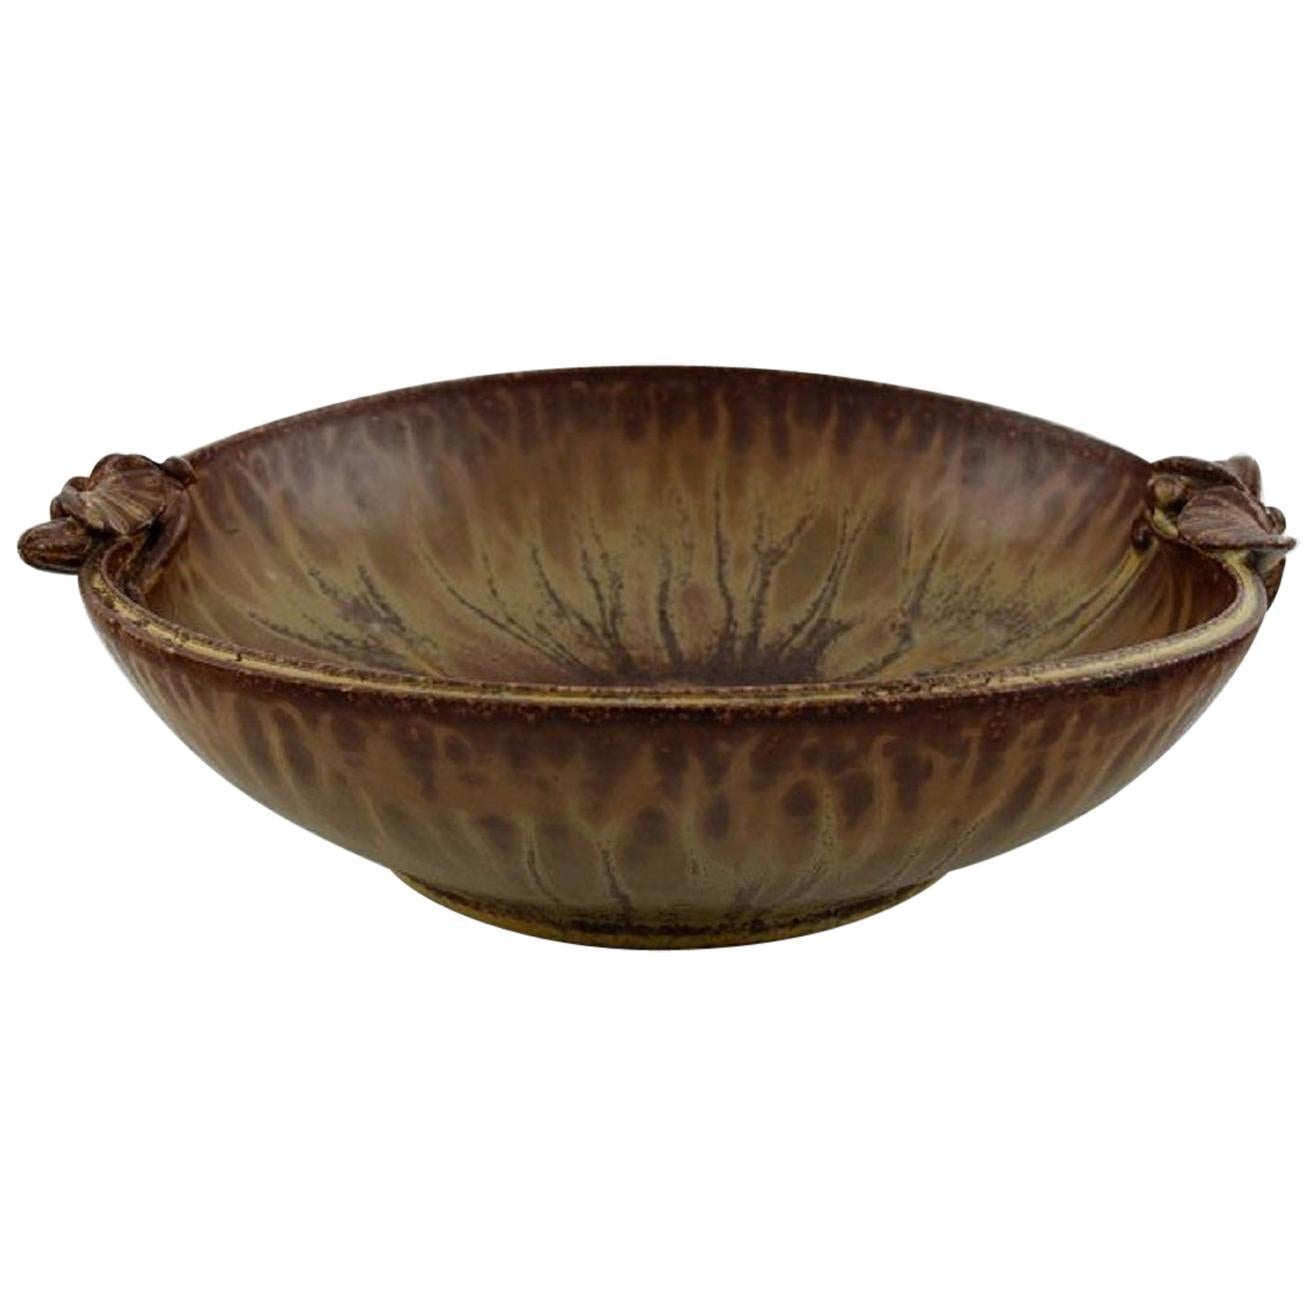 Arne Bang, Denmark, Bowl in Glazed Ceramics Decorated with Foliage, 1940s